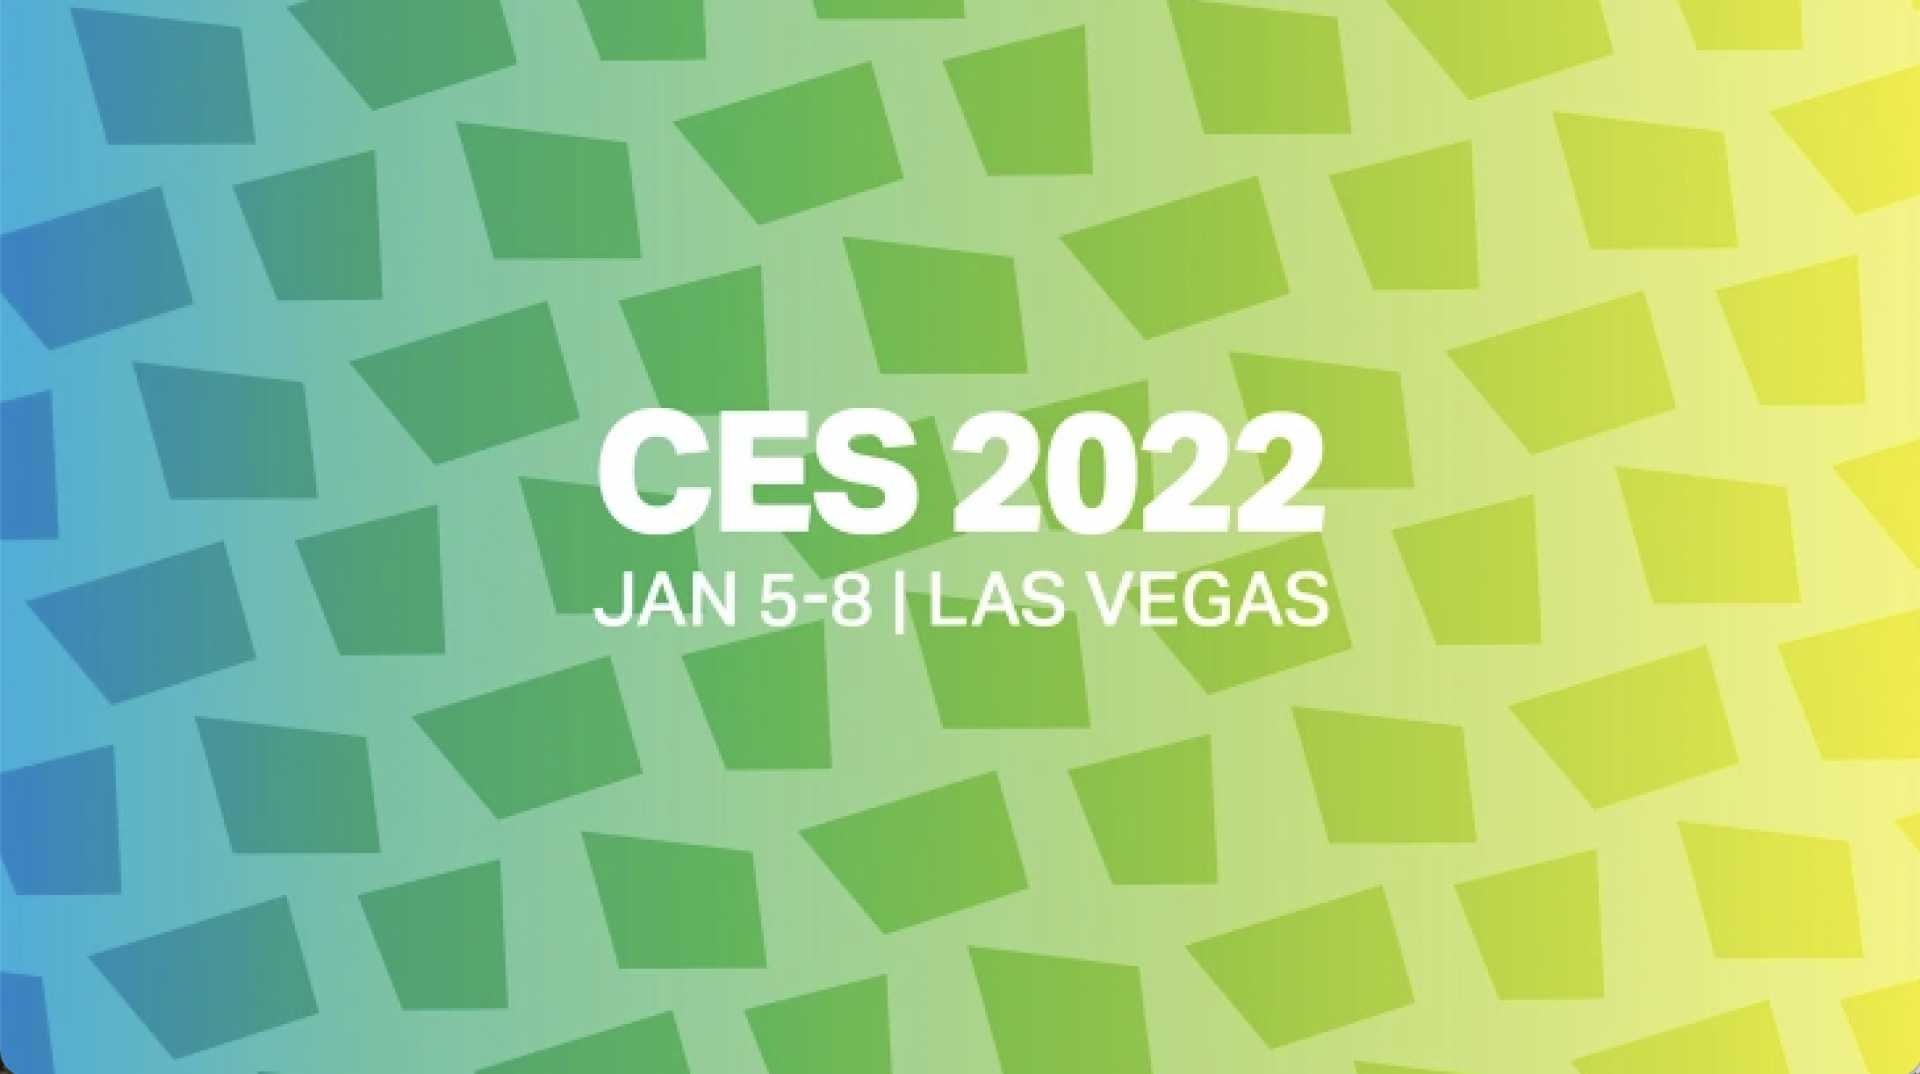 What was new at CES 2022?